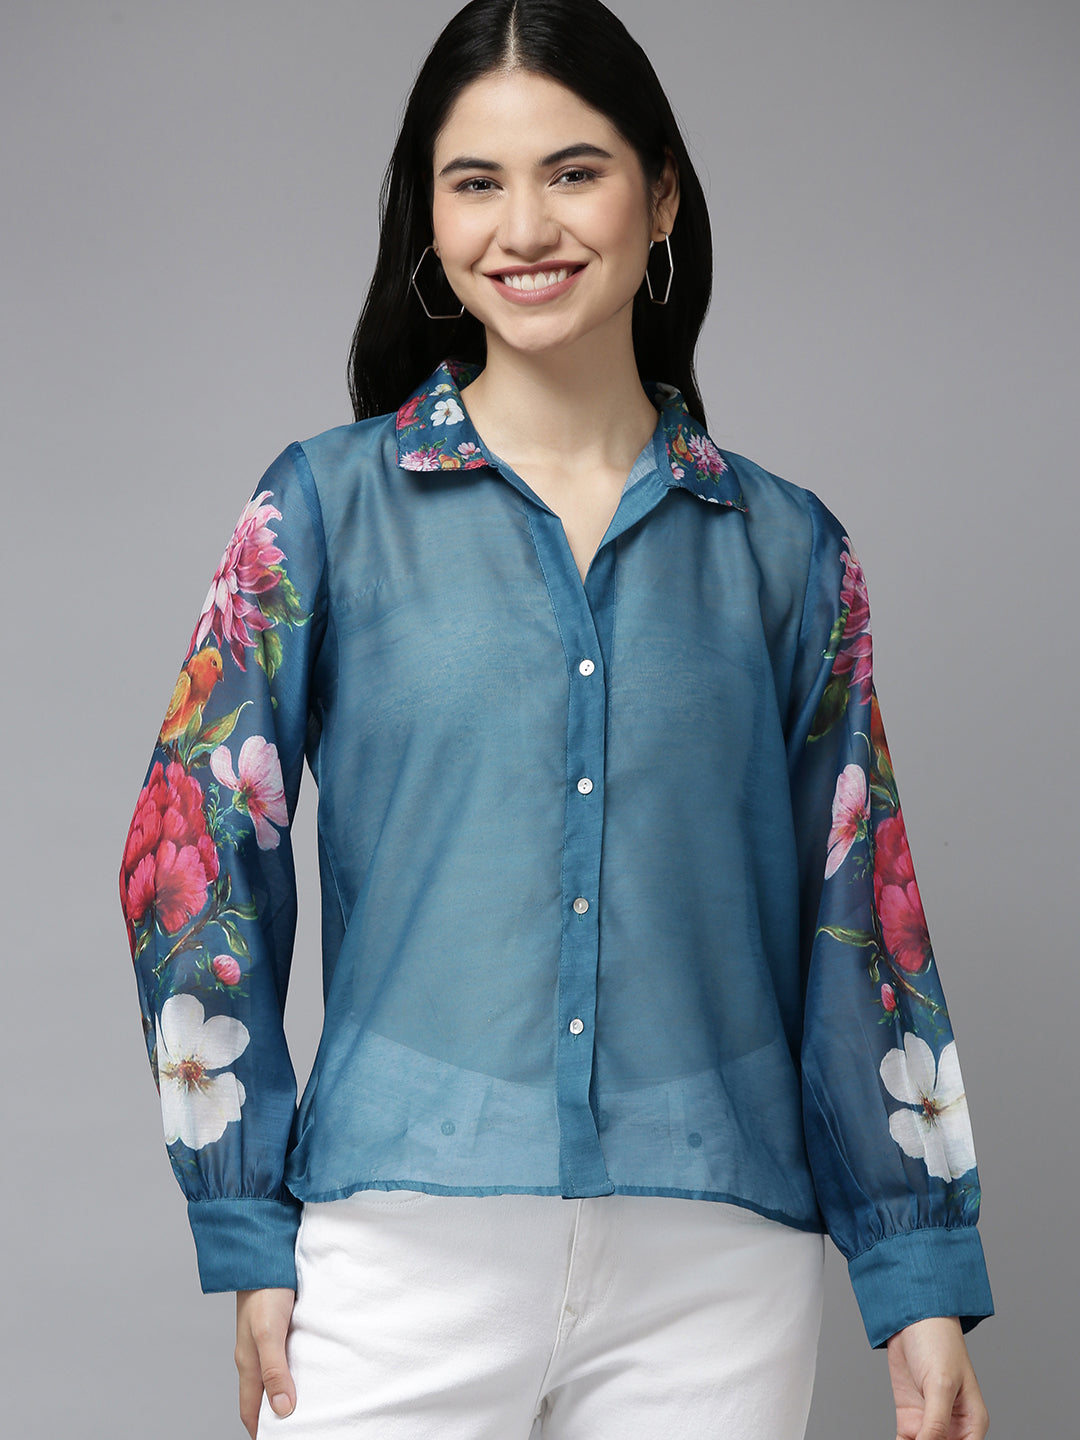 Bhama Couture Teal Blue Floral Printd Shirt Style Top